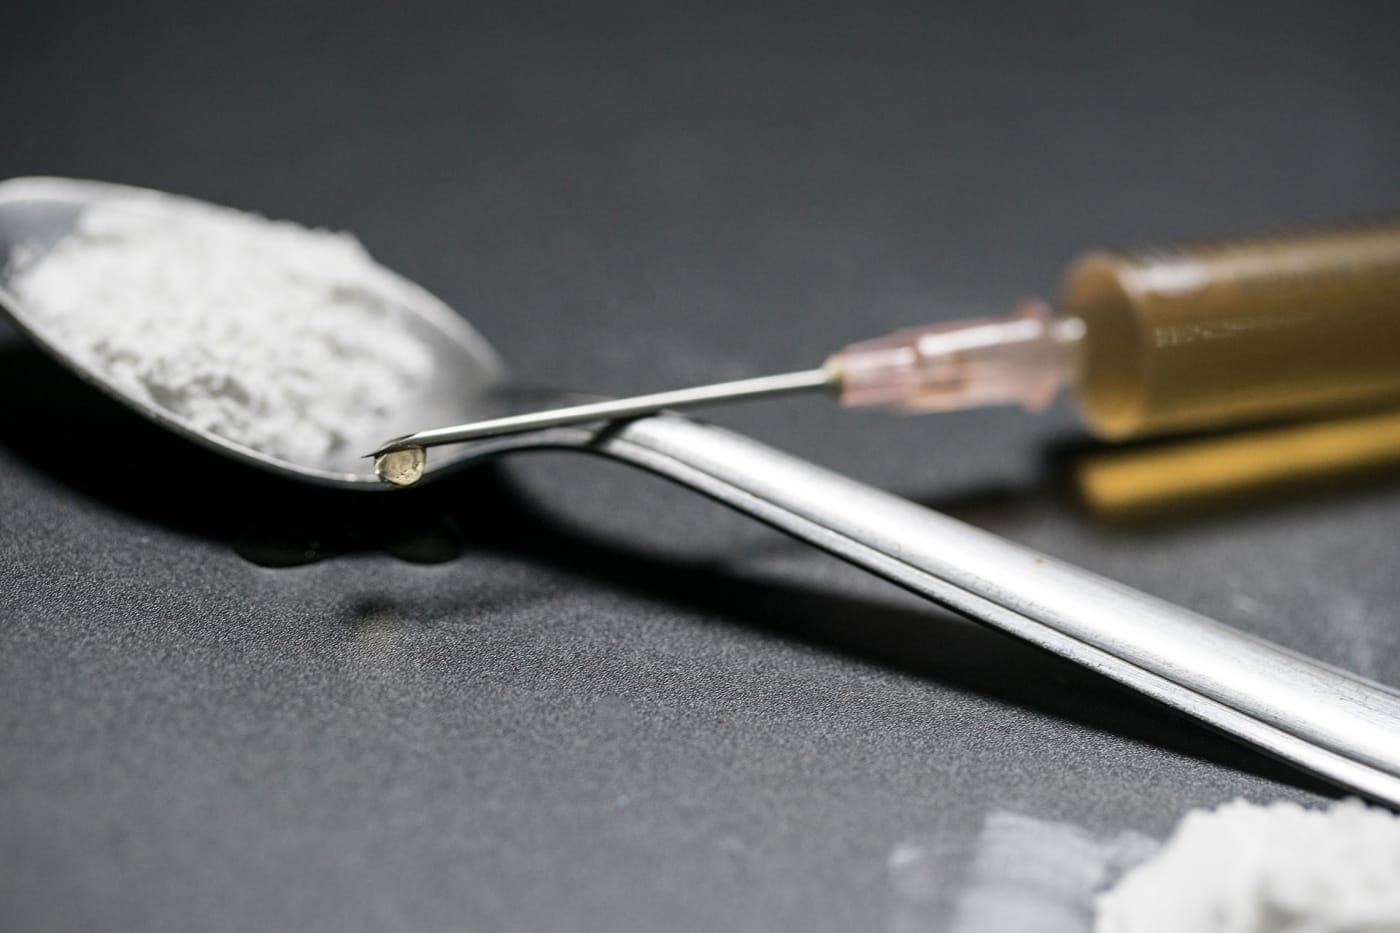 A spoonful of cocaine and a syringe of heroin